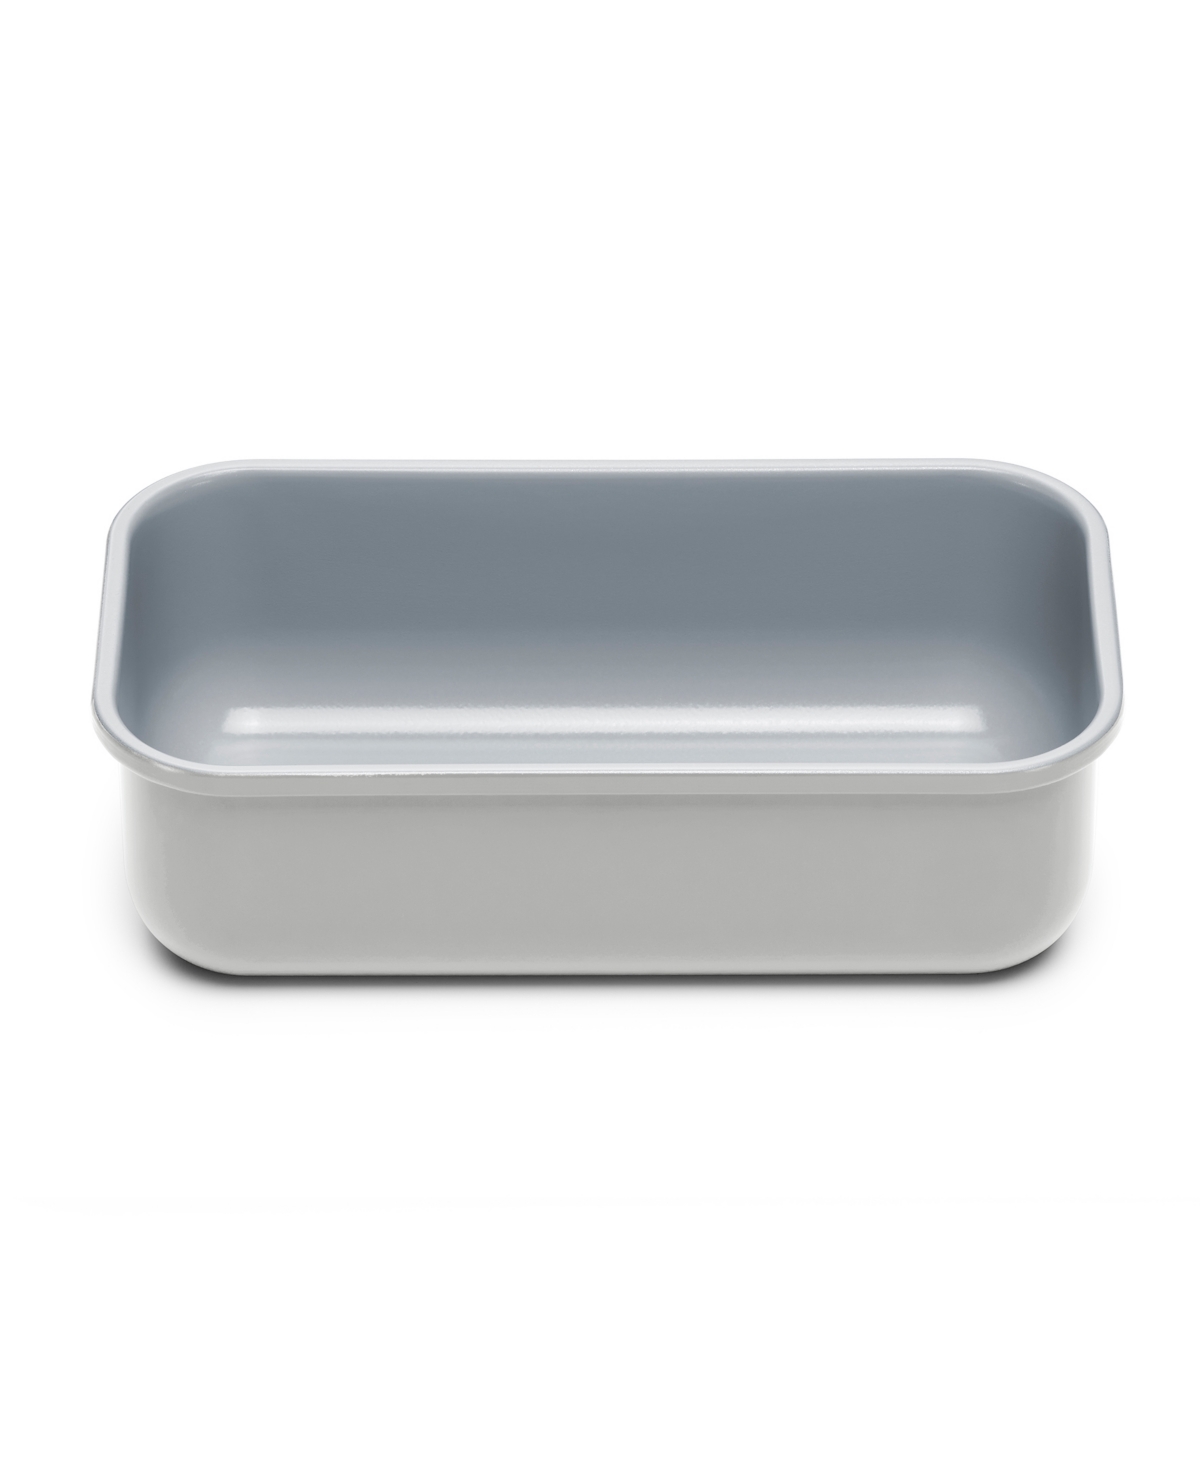 Caraway Non-stick Loaf Pan In Gray